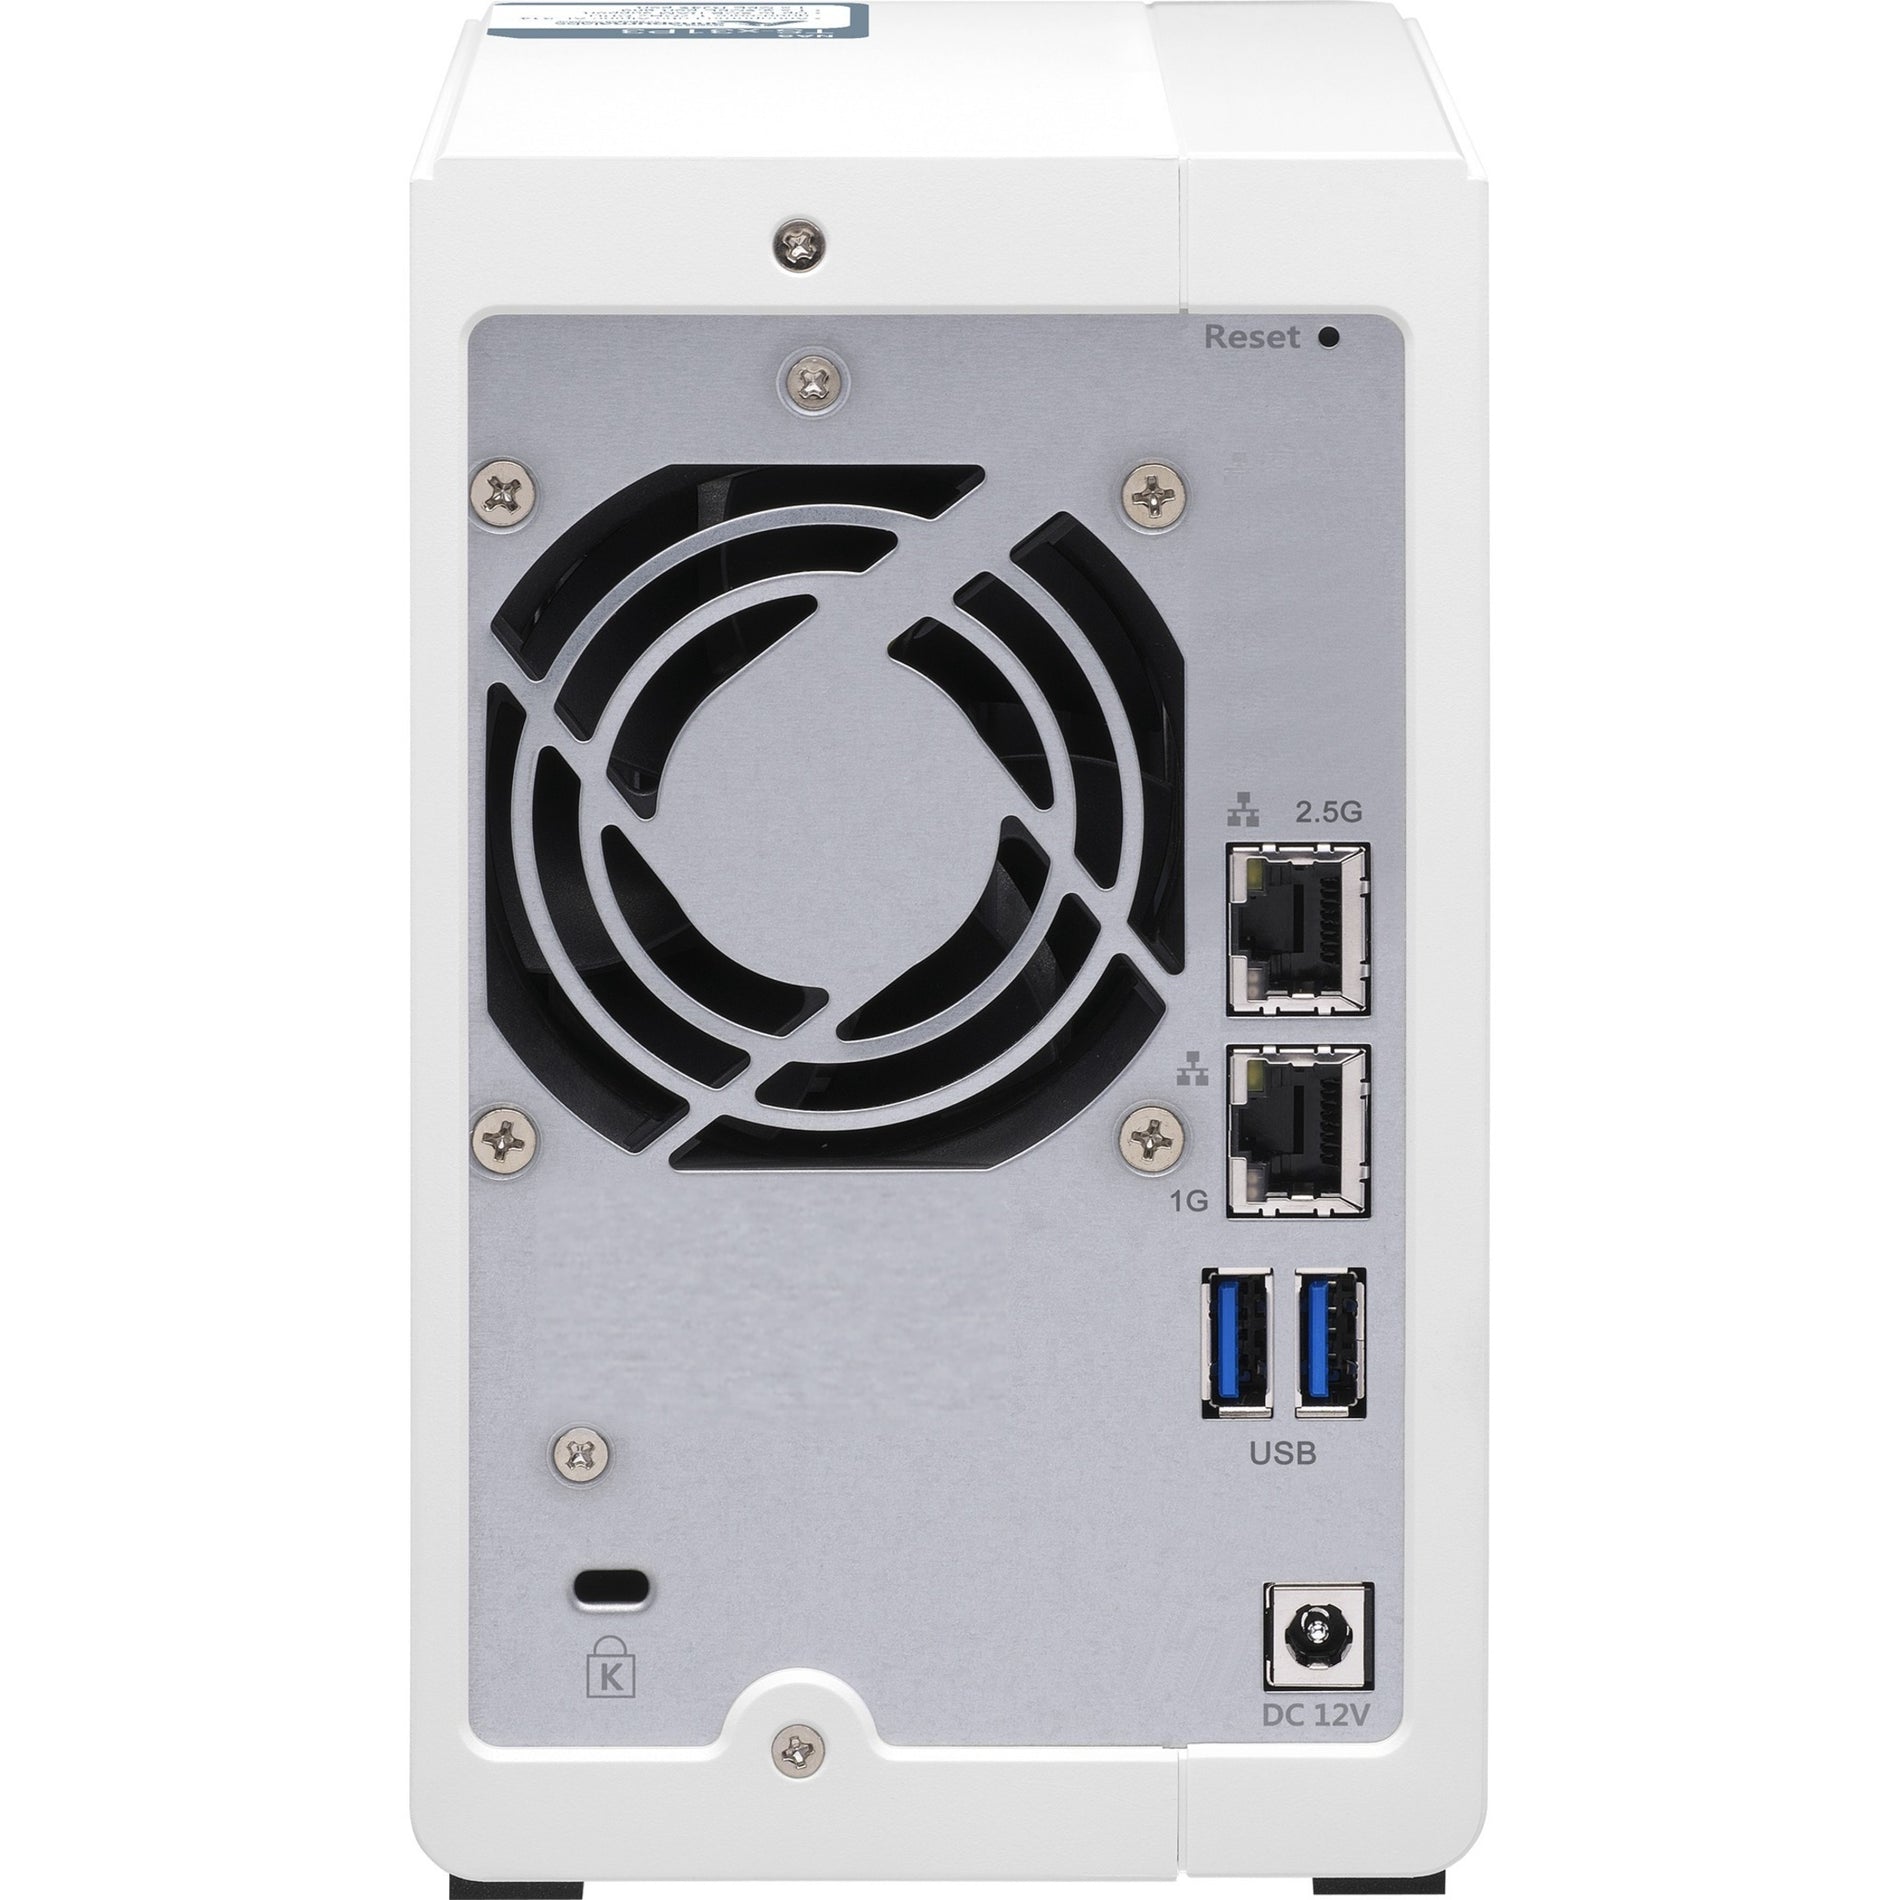 QNAP TS-231P3-4G-US Quad-core 1.7GHz NAS with 2.5GbE and Feature-rich Applications for Home & Office